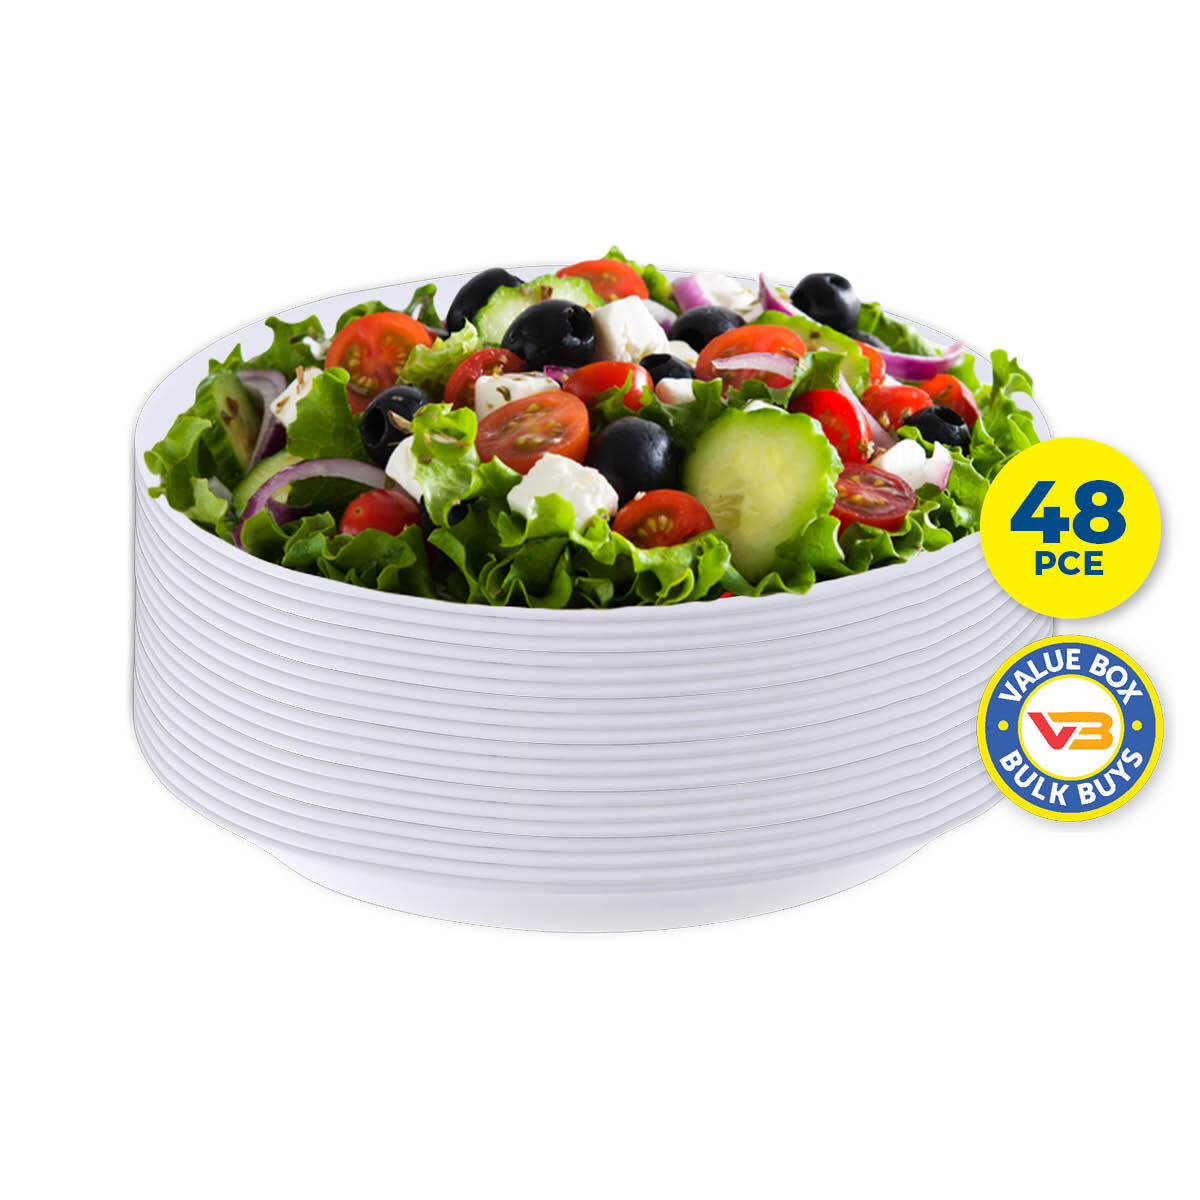 Home Master 48PCE Party Platters Oval Plastic Lightweight Durable 43cm